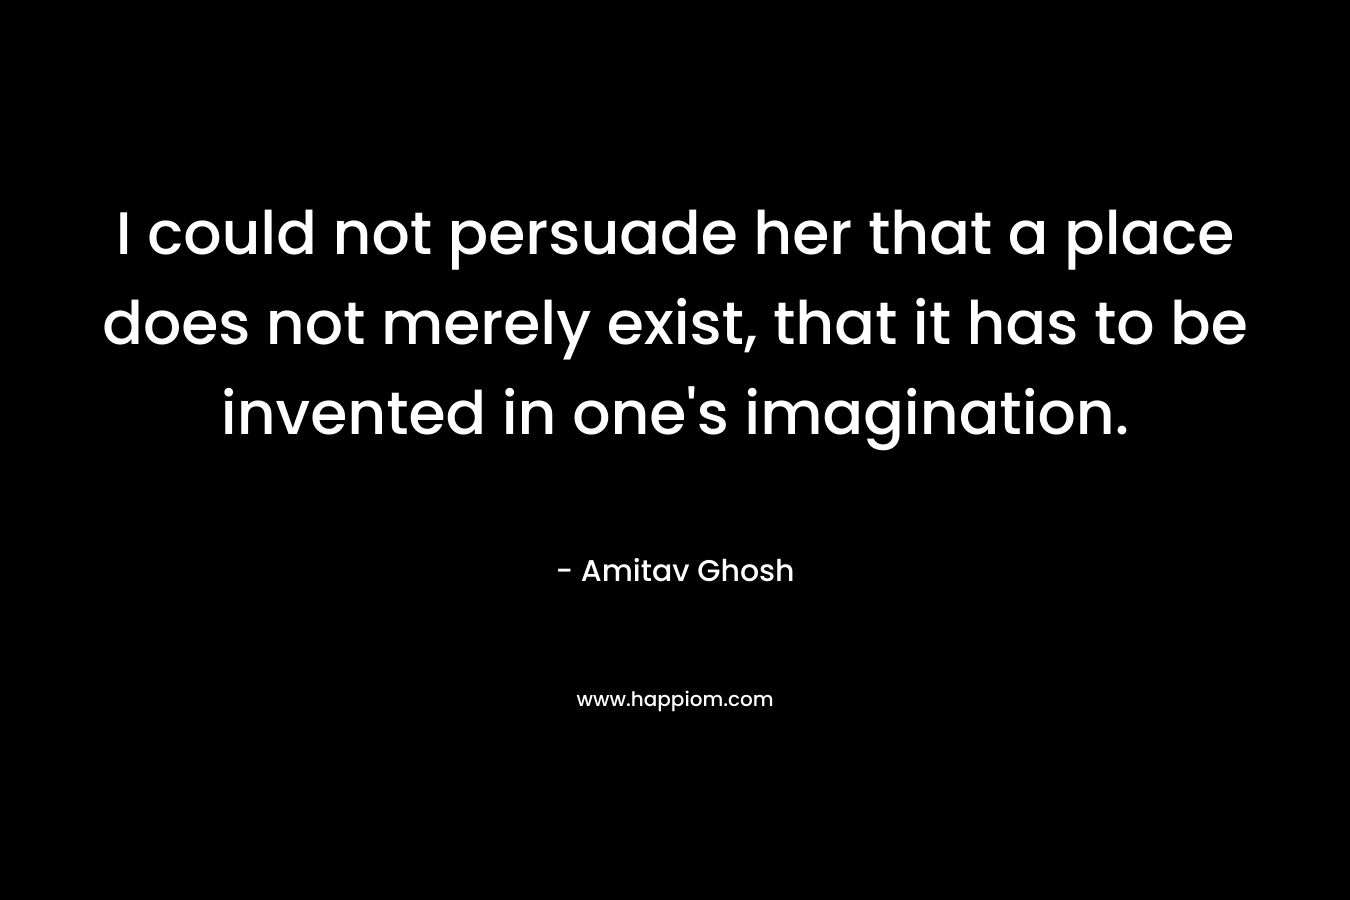 I could not persuade her that a place does not merely exist, that it has to be invented in one’s imagination. – Amitav Ghosh